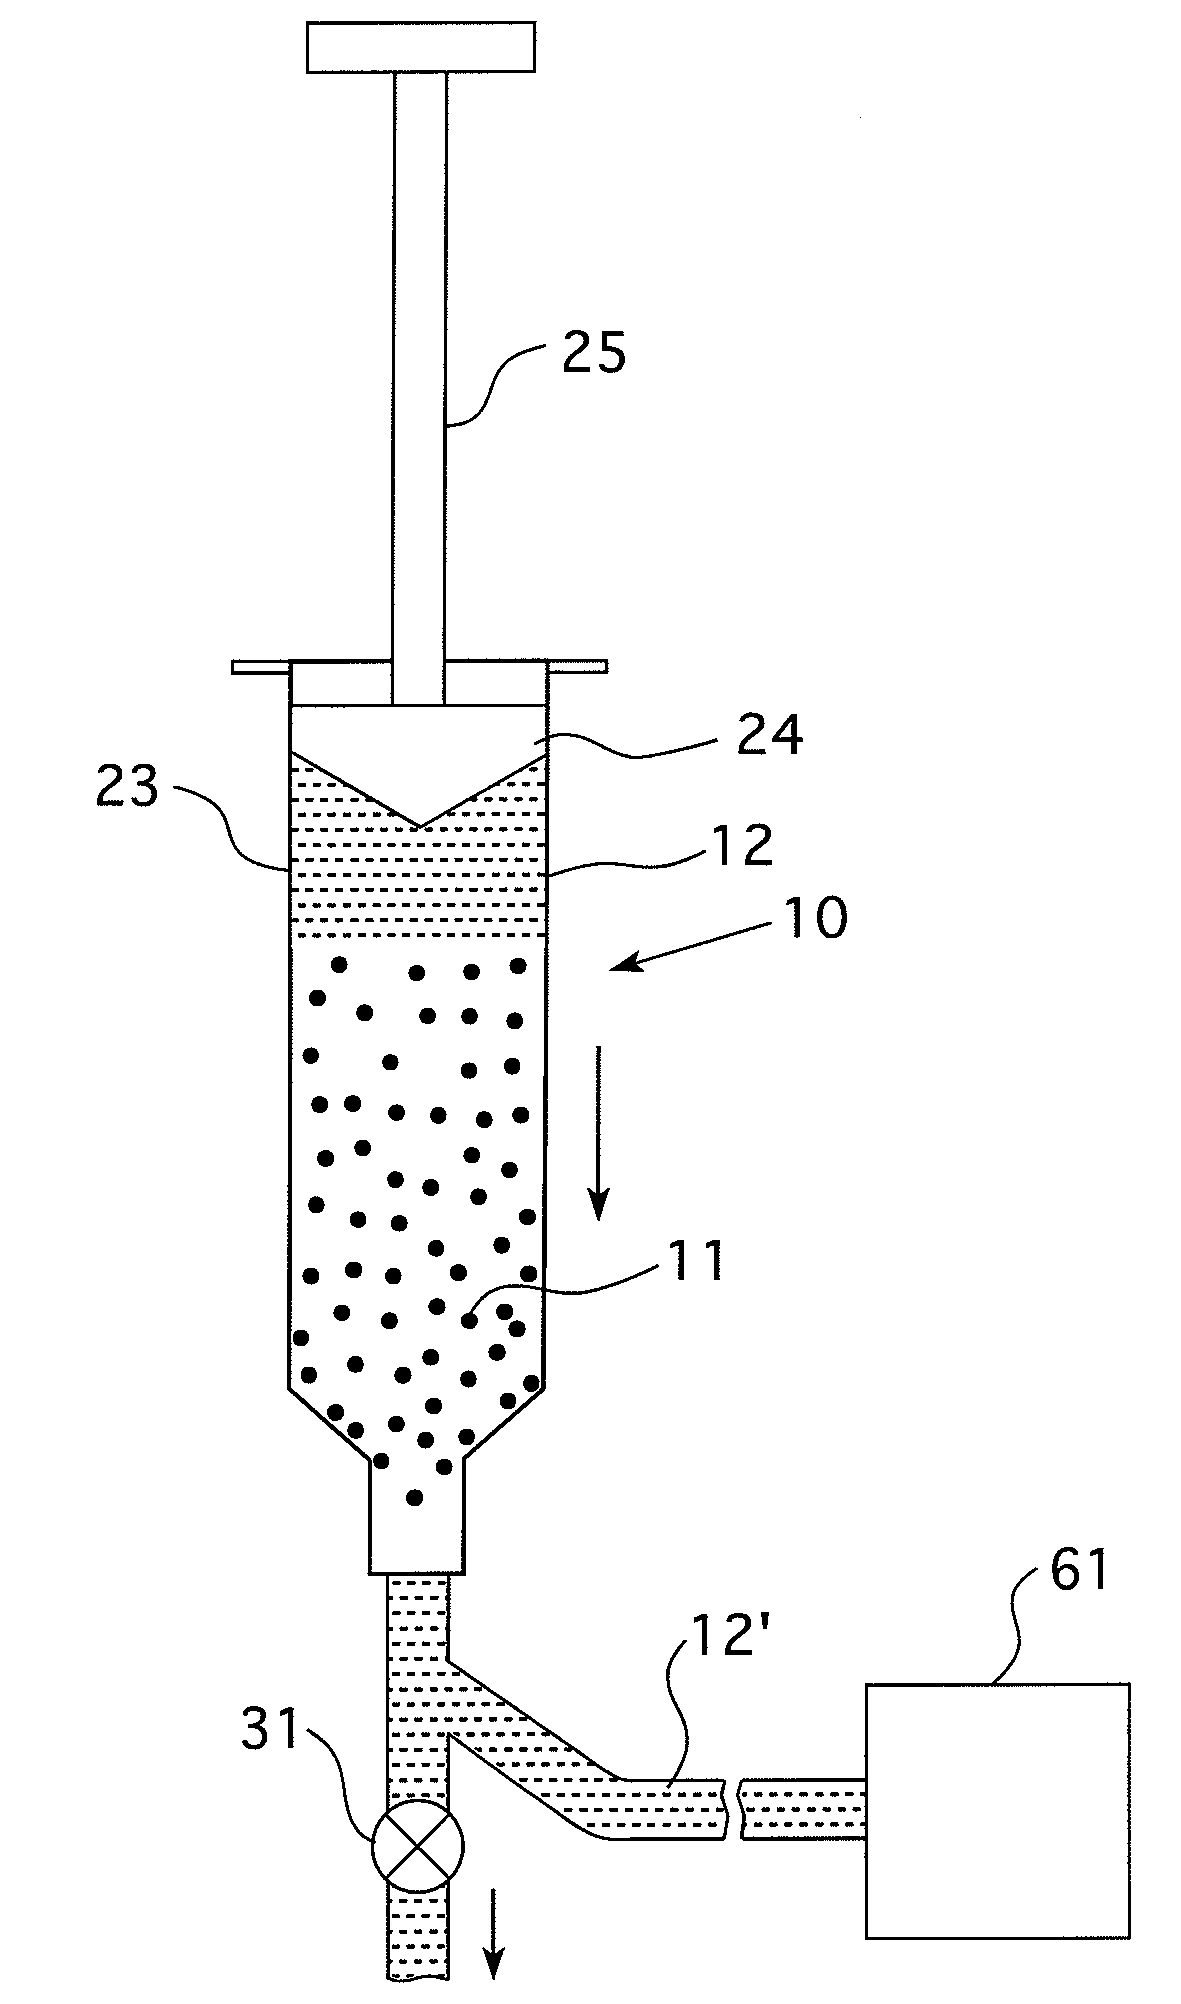 Systems and methods of delivering a dilated slurry to a patient